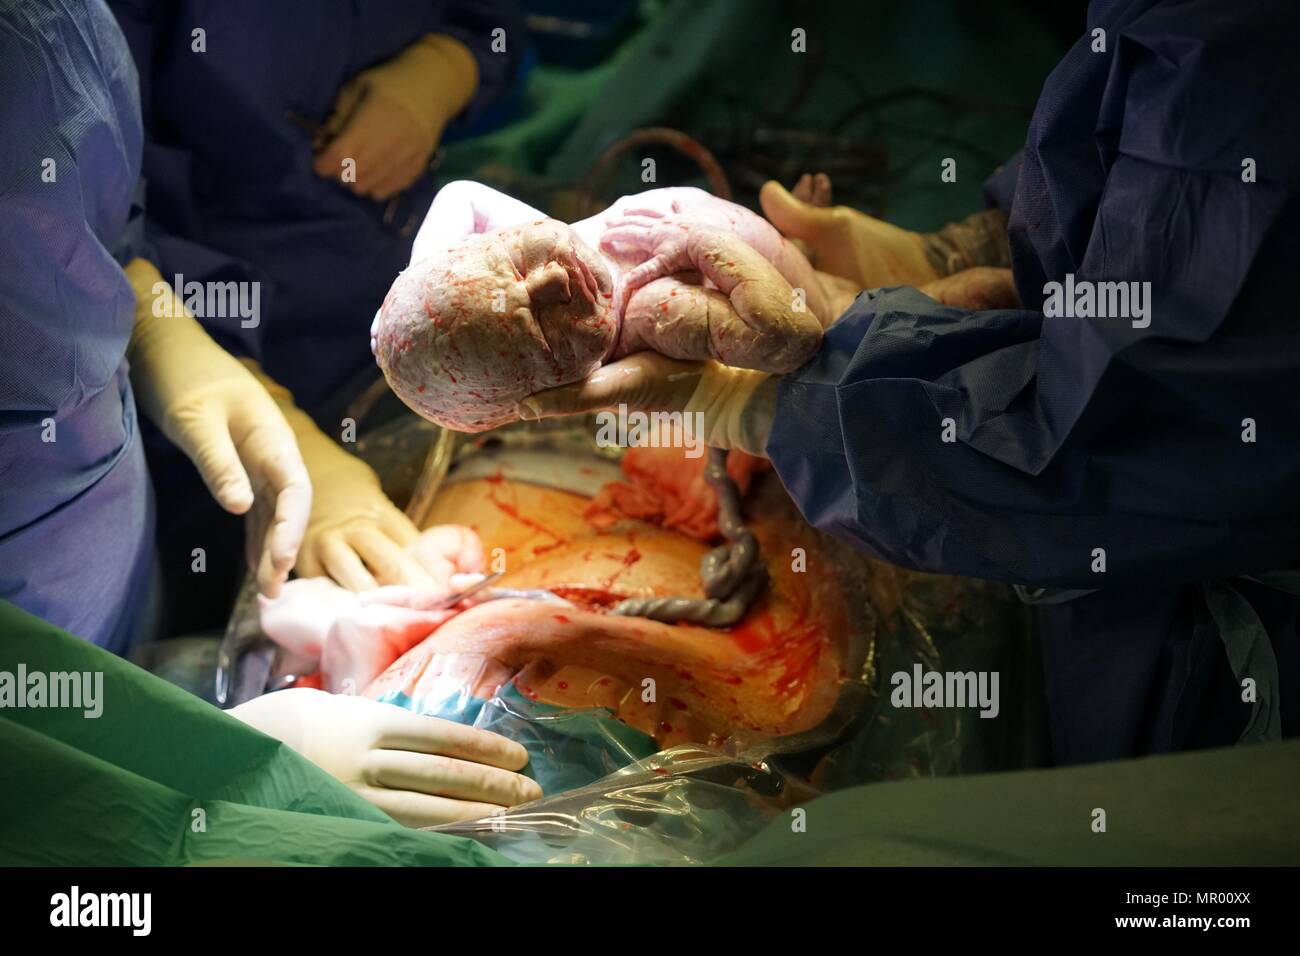 Baby being born by Caesarean section in hospital, covered in vernix, umbilical cord still attached and mother’s surgical wound in background Stock Photo